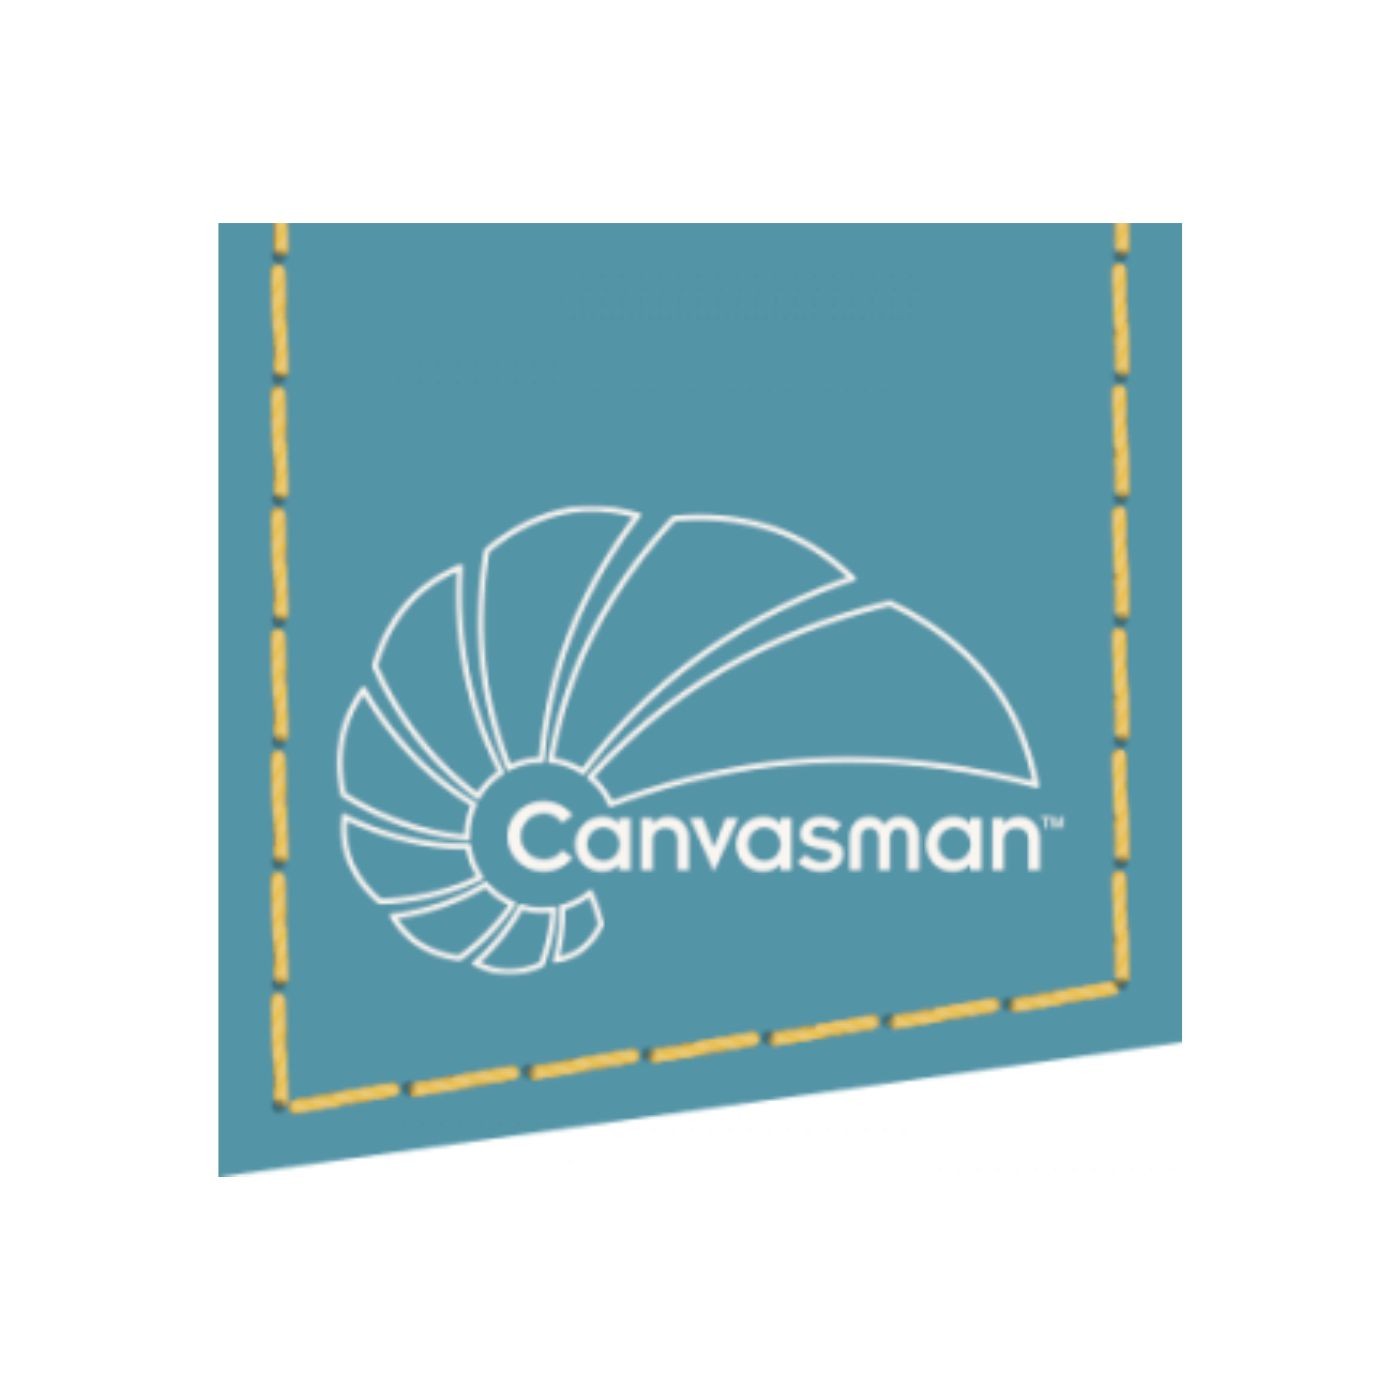 Canvasman Limited